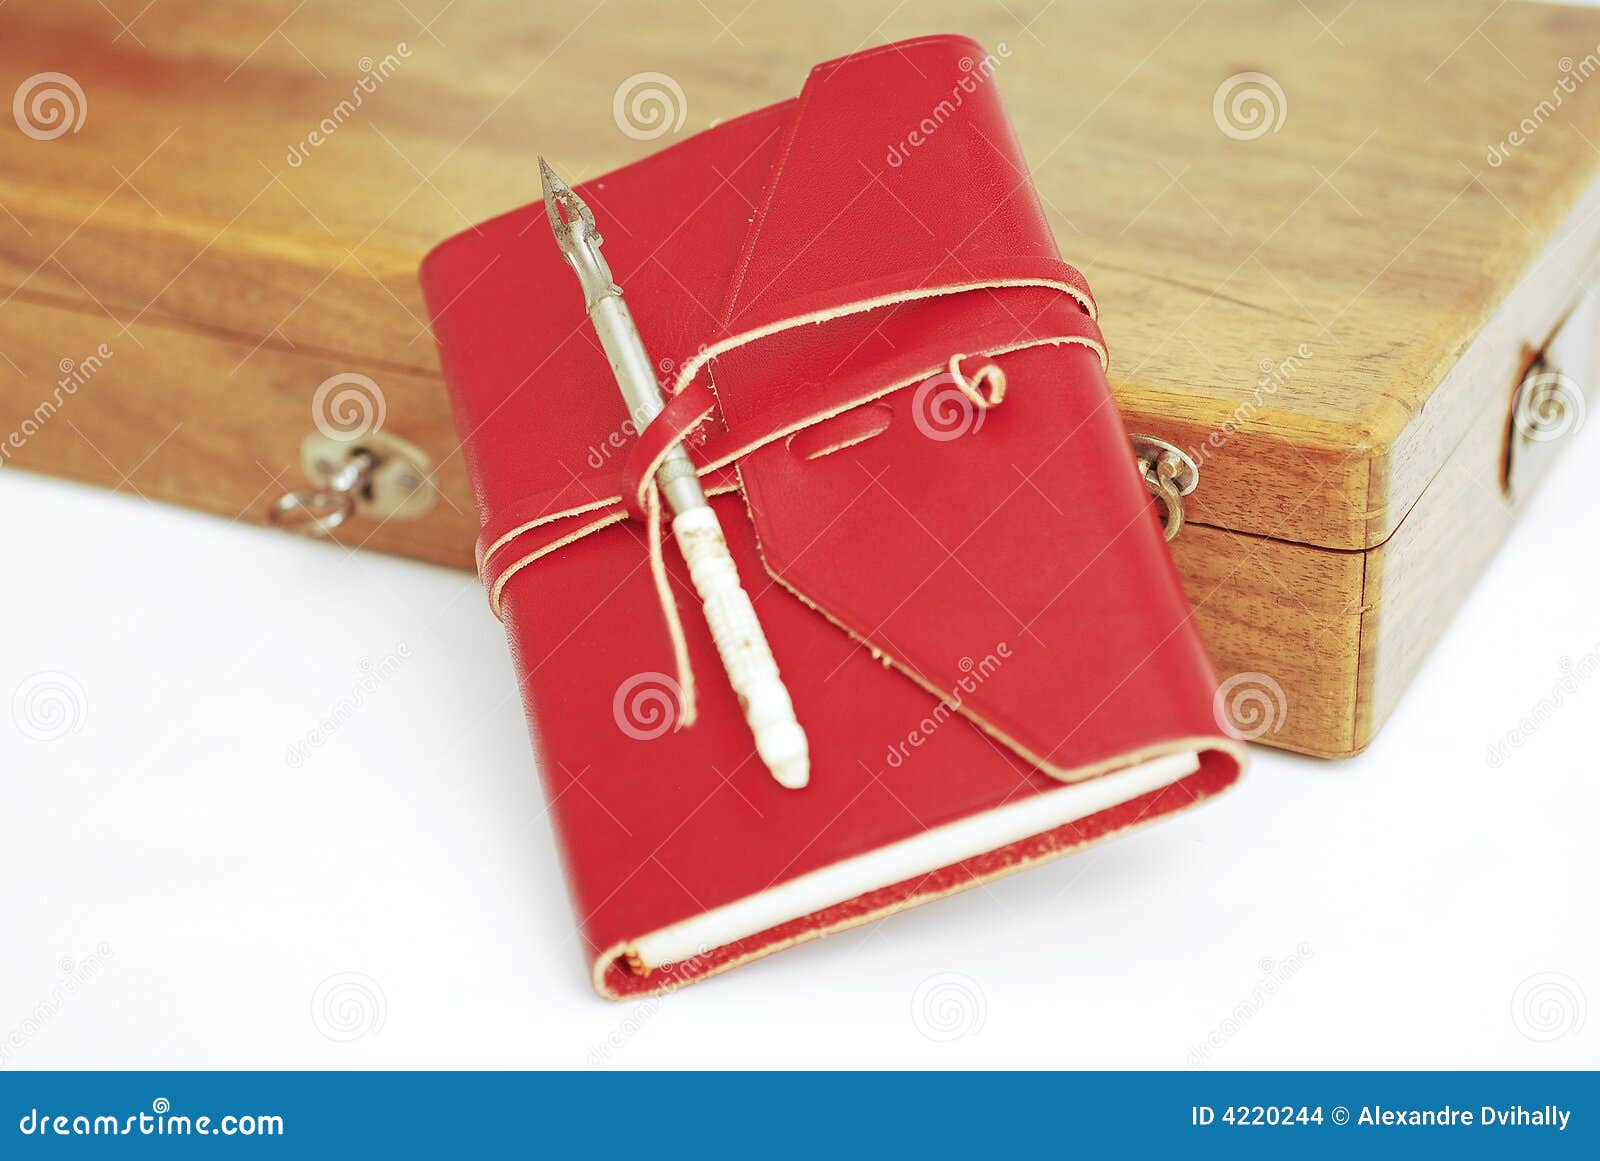 Diary Book Red Stock Images - Image: 4220244